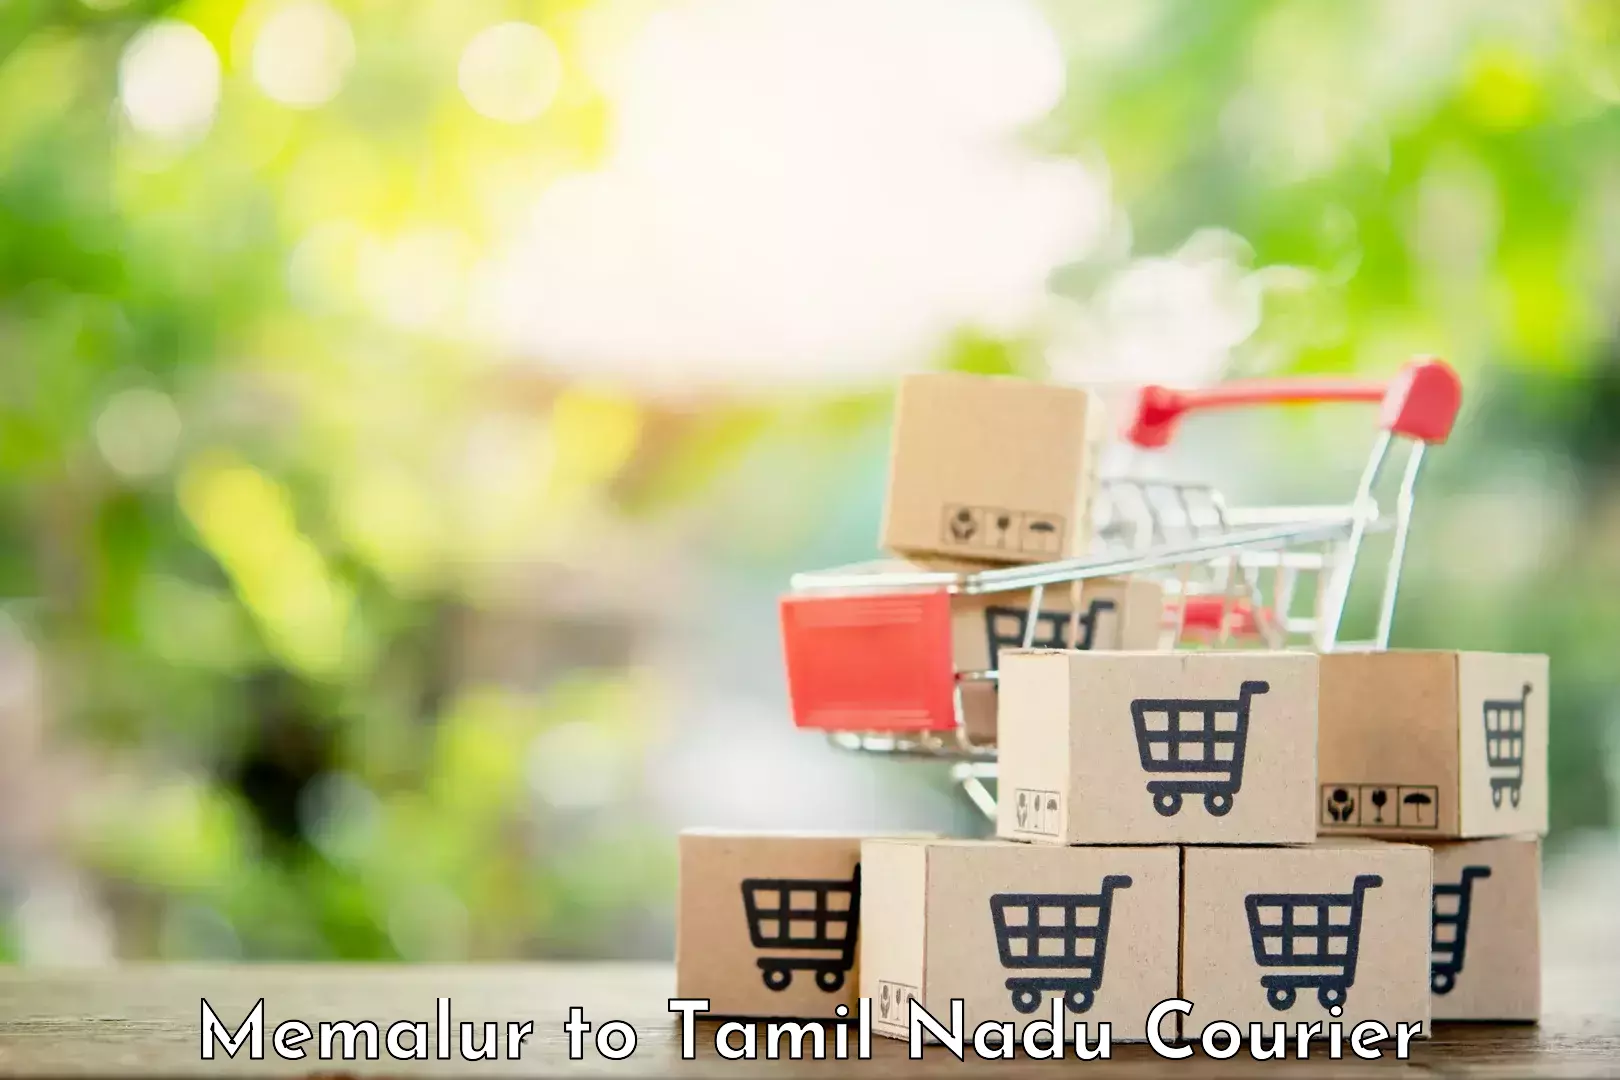 Sustainable delivery practices Memalur to Tamil Nadu